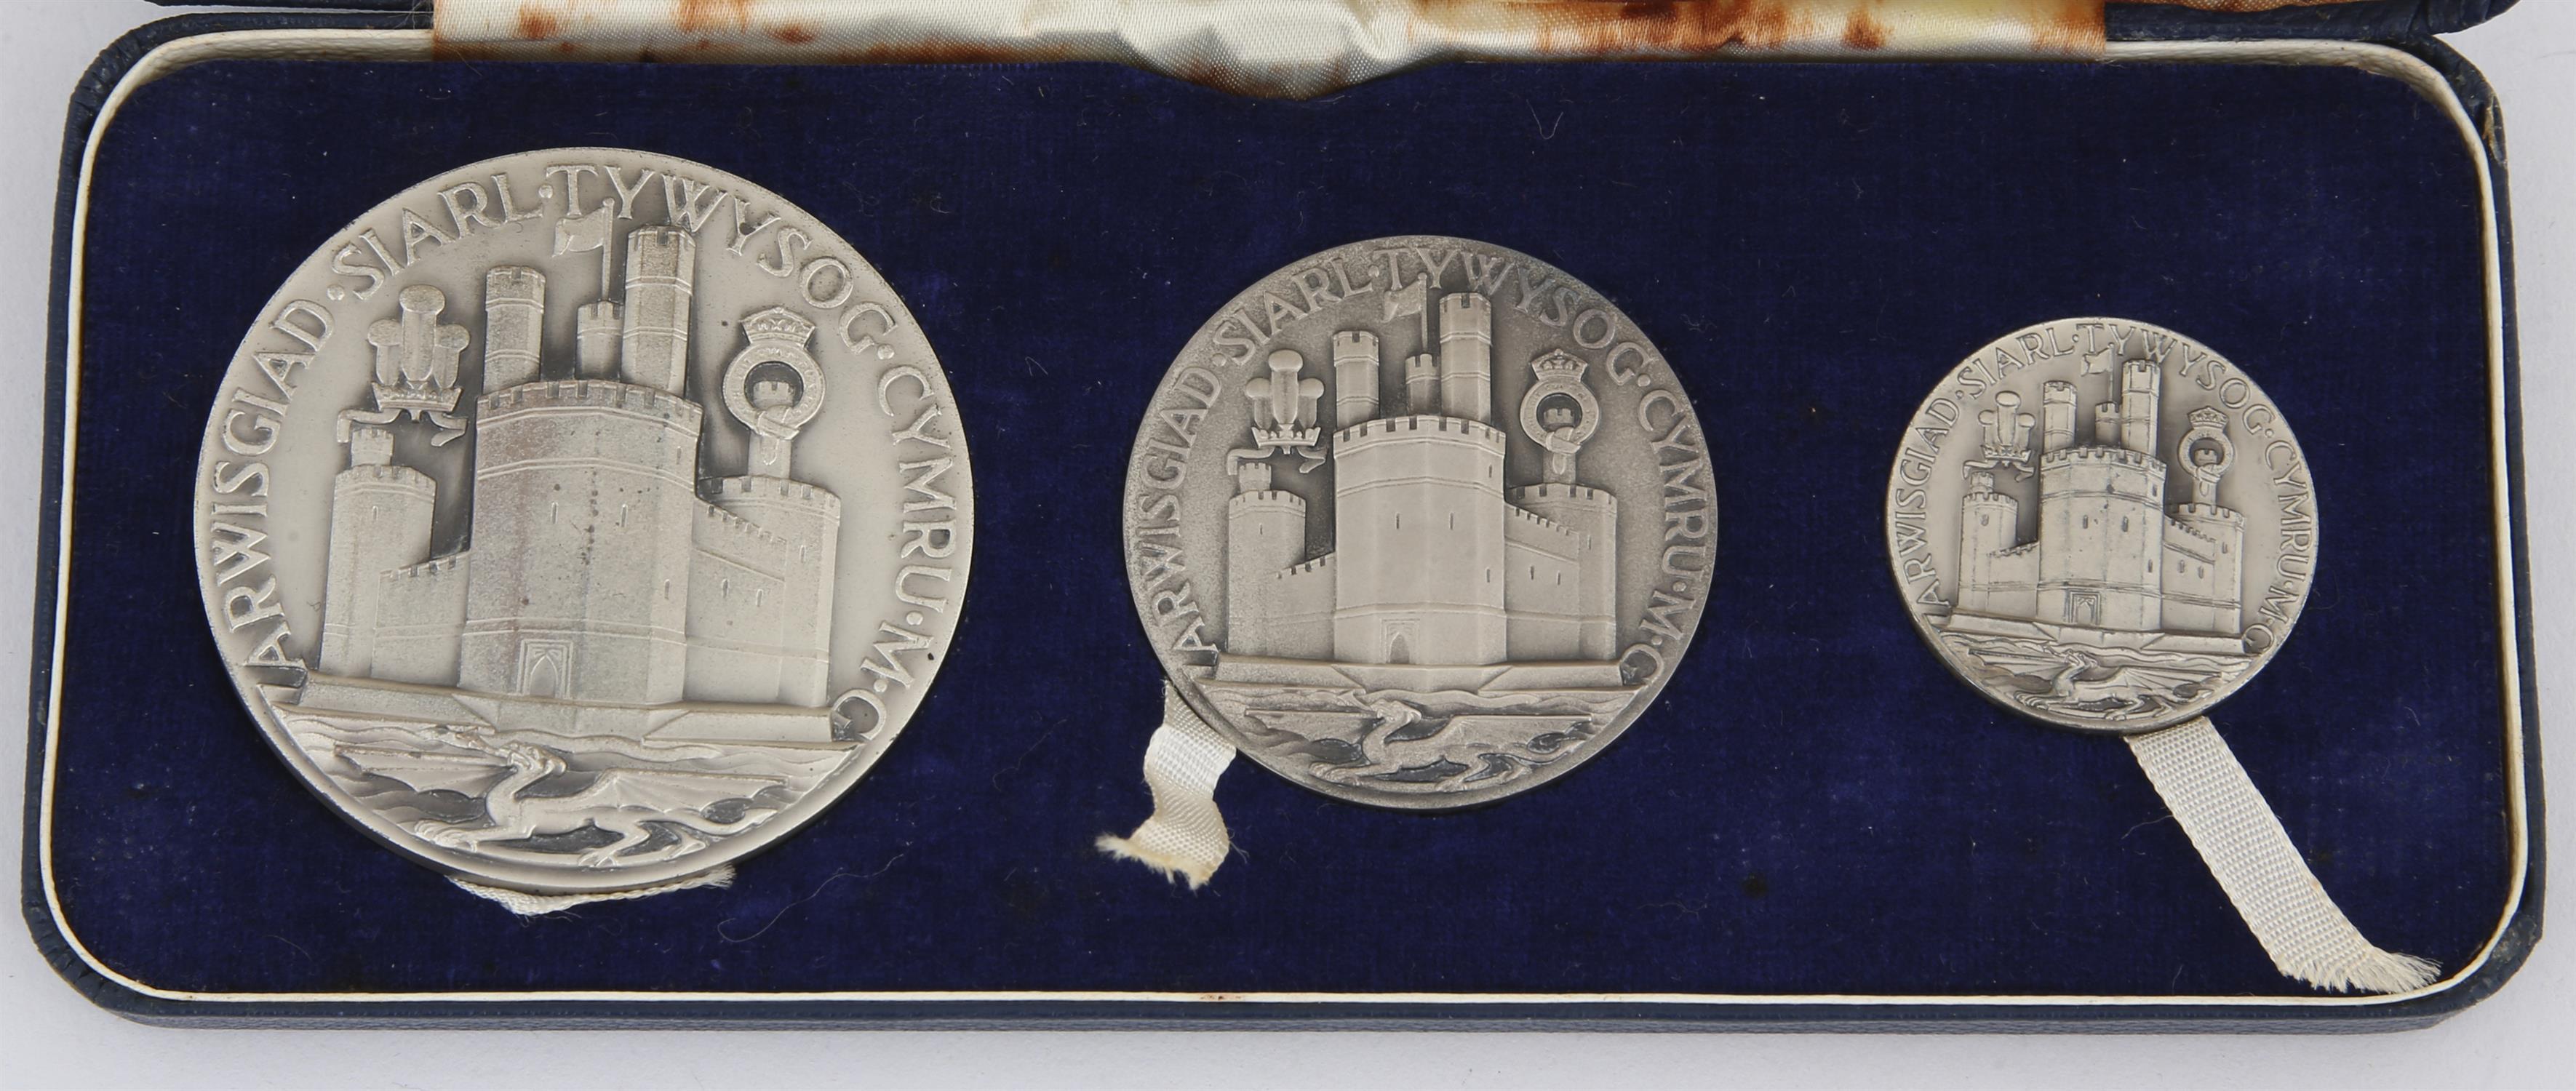 1969 Britannia silver Prince of Wales Investiture three-piece coin set by John Pinches of London, - Image 3 of 6